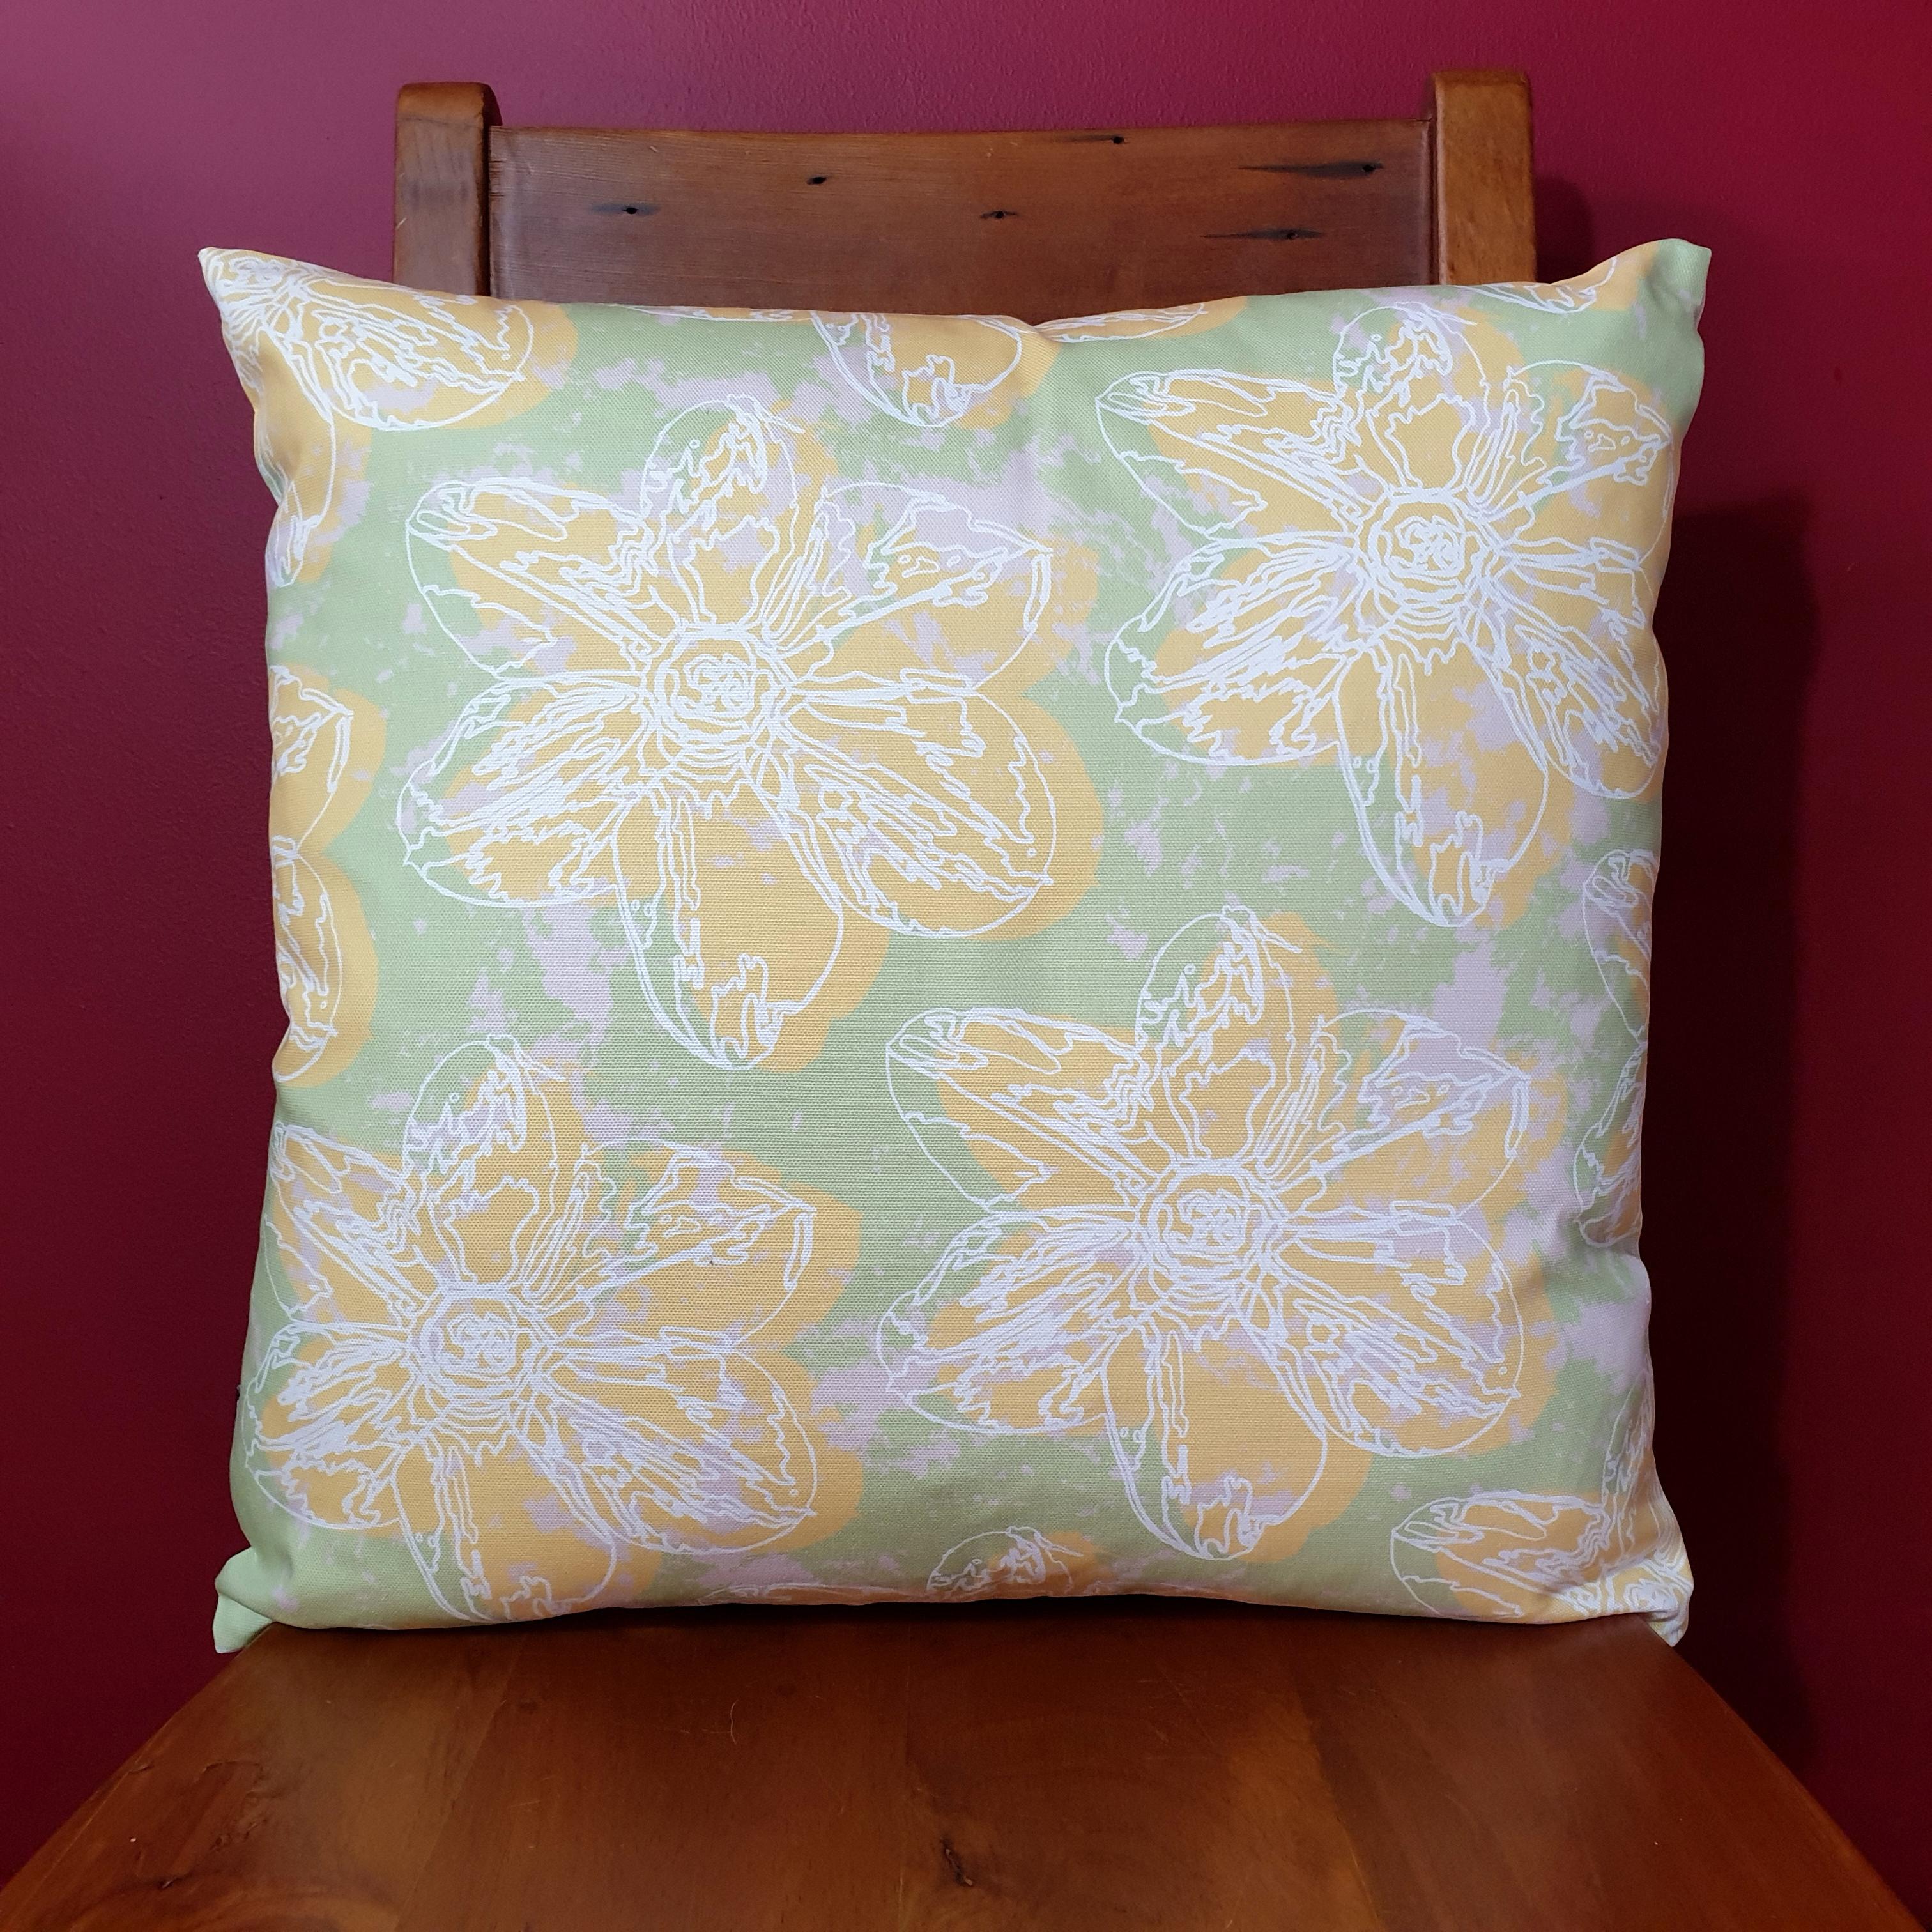 Double-sided 51cm square Flower Splash cushion designed by thetinkan. Yellow narcissus flower with white traced outline set within a mint green background with pale pink paint splashes. Available with an optional luxury cushion inner pad. VIEW PRODUCT >>